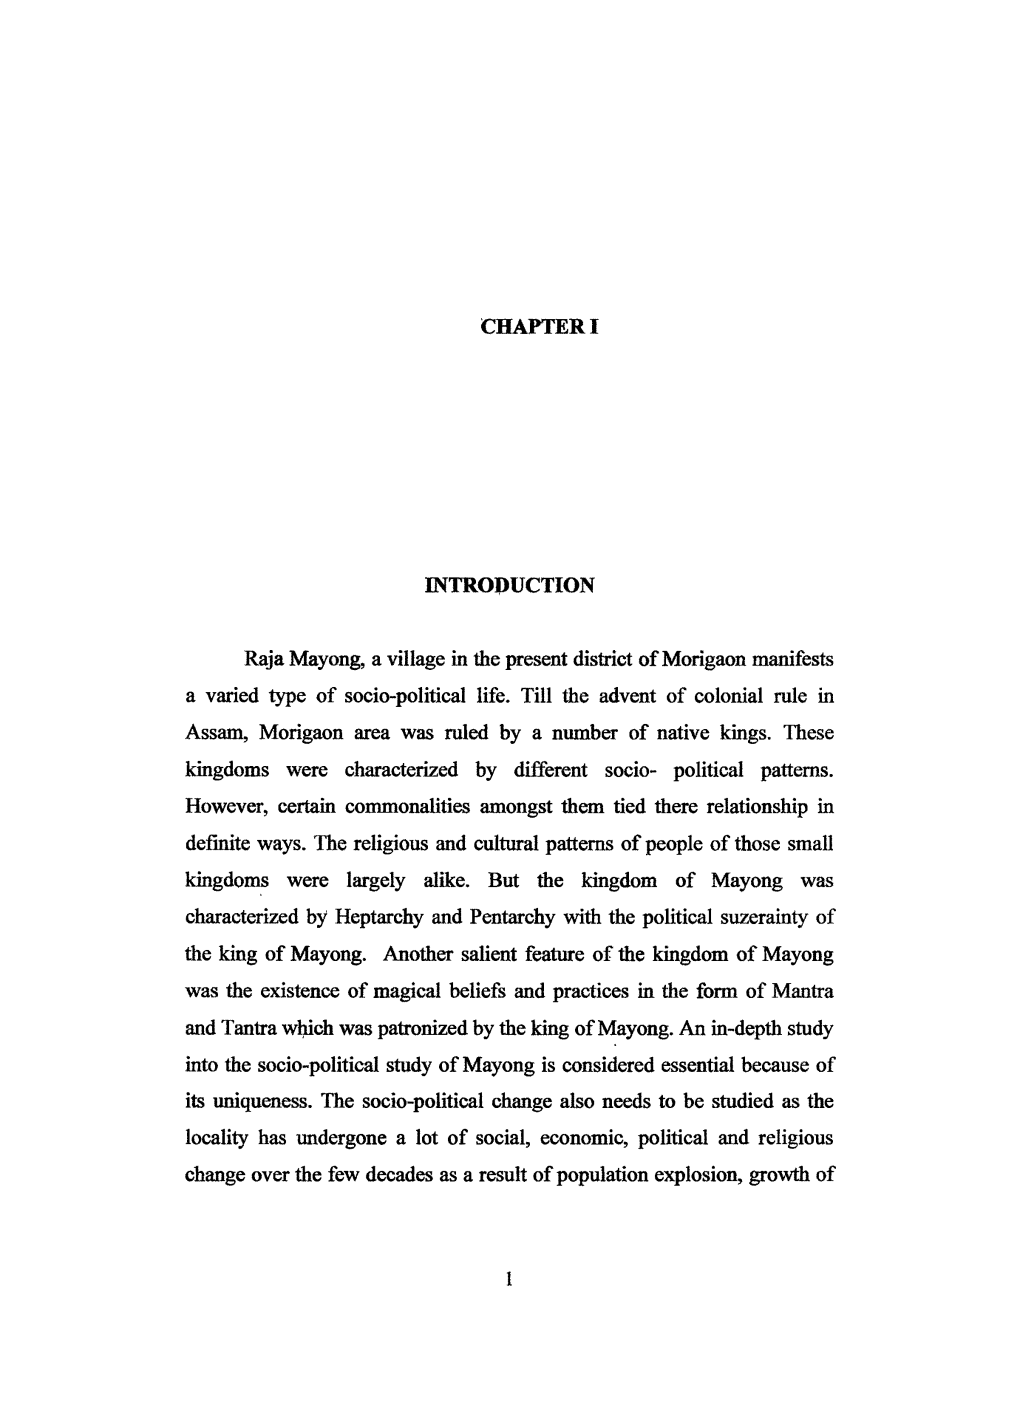 CHAPTER I INTRODUCTION Raja Mayong, a Village in the Present